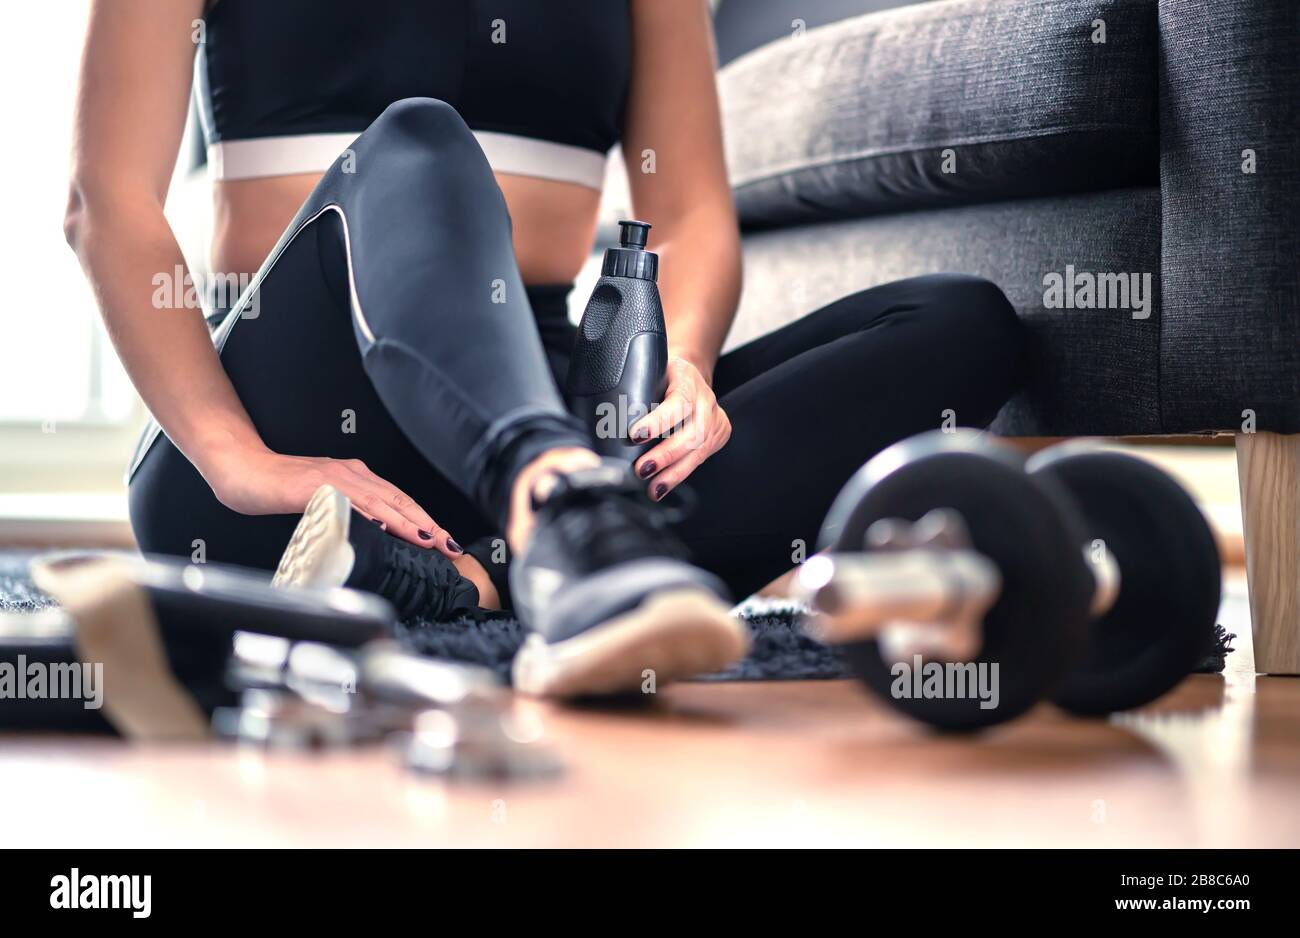 Home workout, weight training and fitness exercise concept. Woman in sportswear sitting in living room with gym equipment and dumbbell. Stock Photo